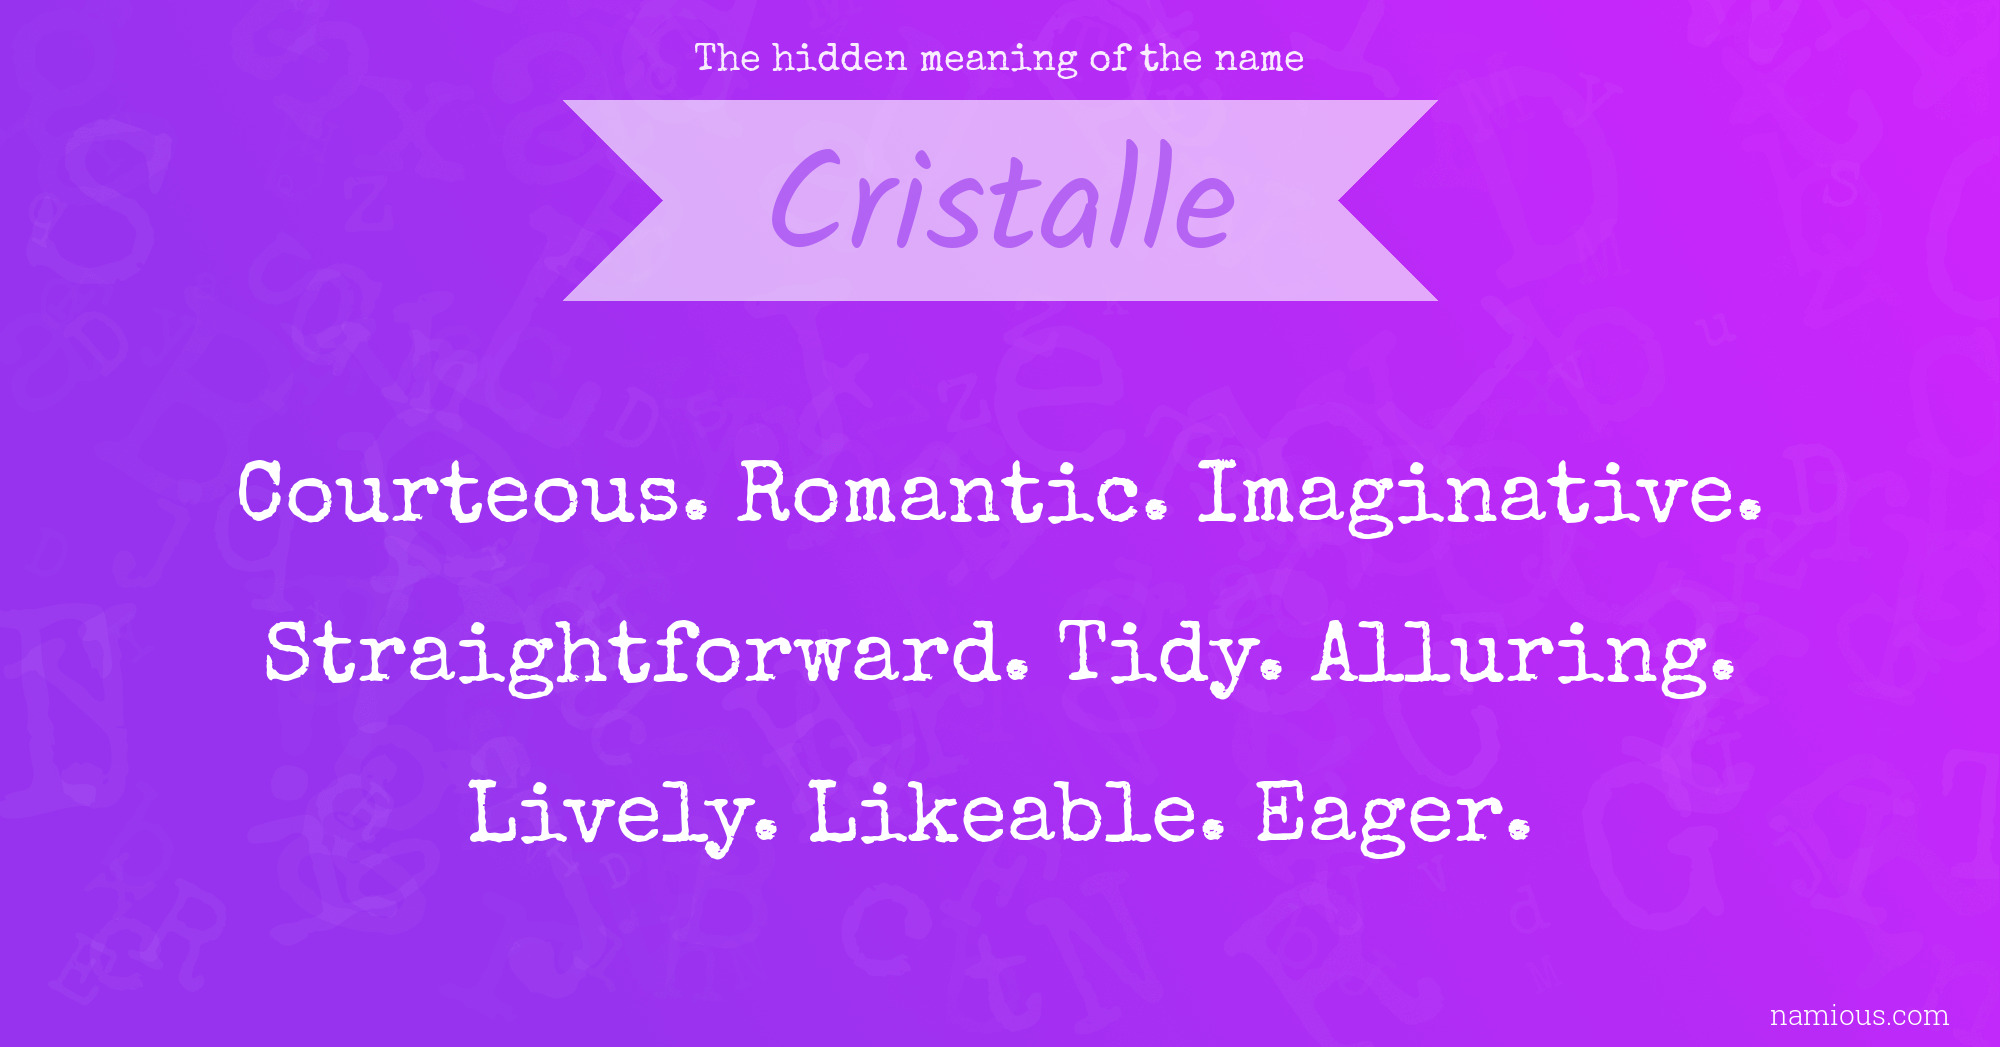 The hidden meaning of the name Cristalle